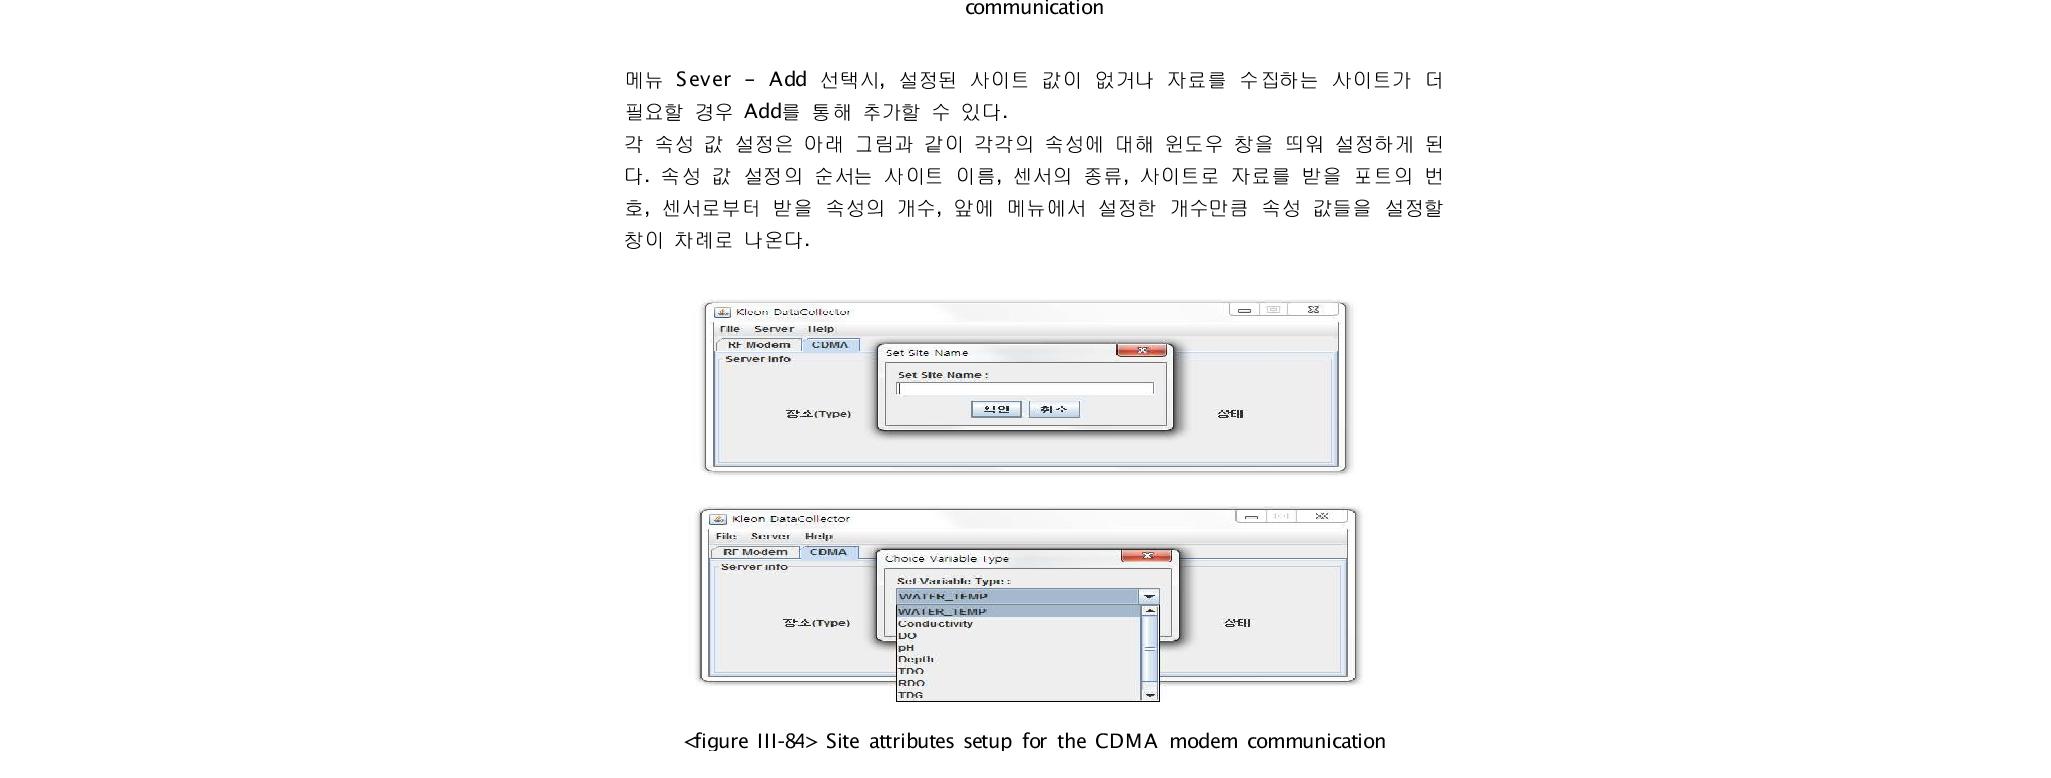 Initial control for the CDMA modemcommunication